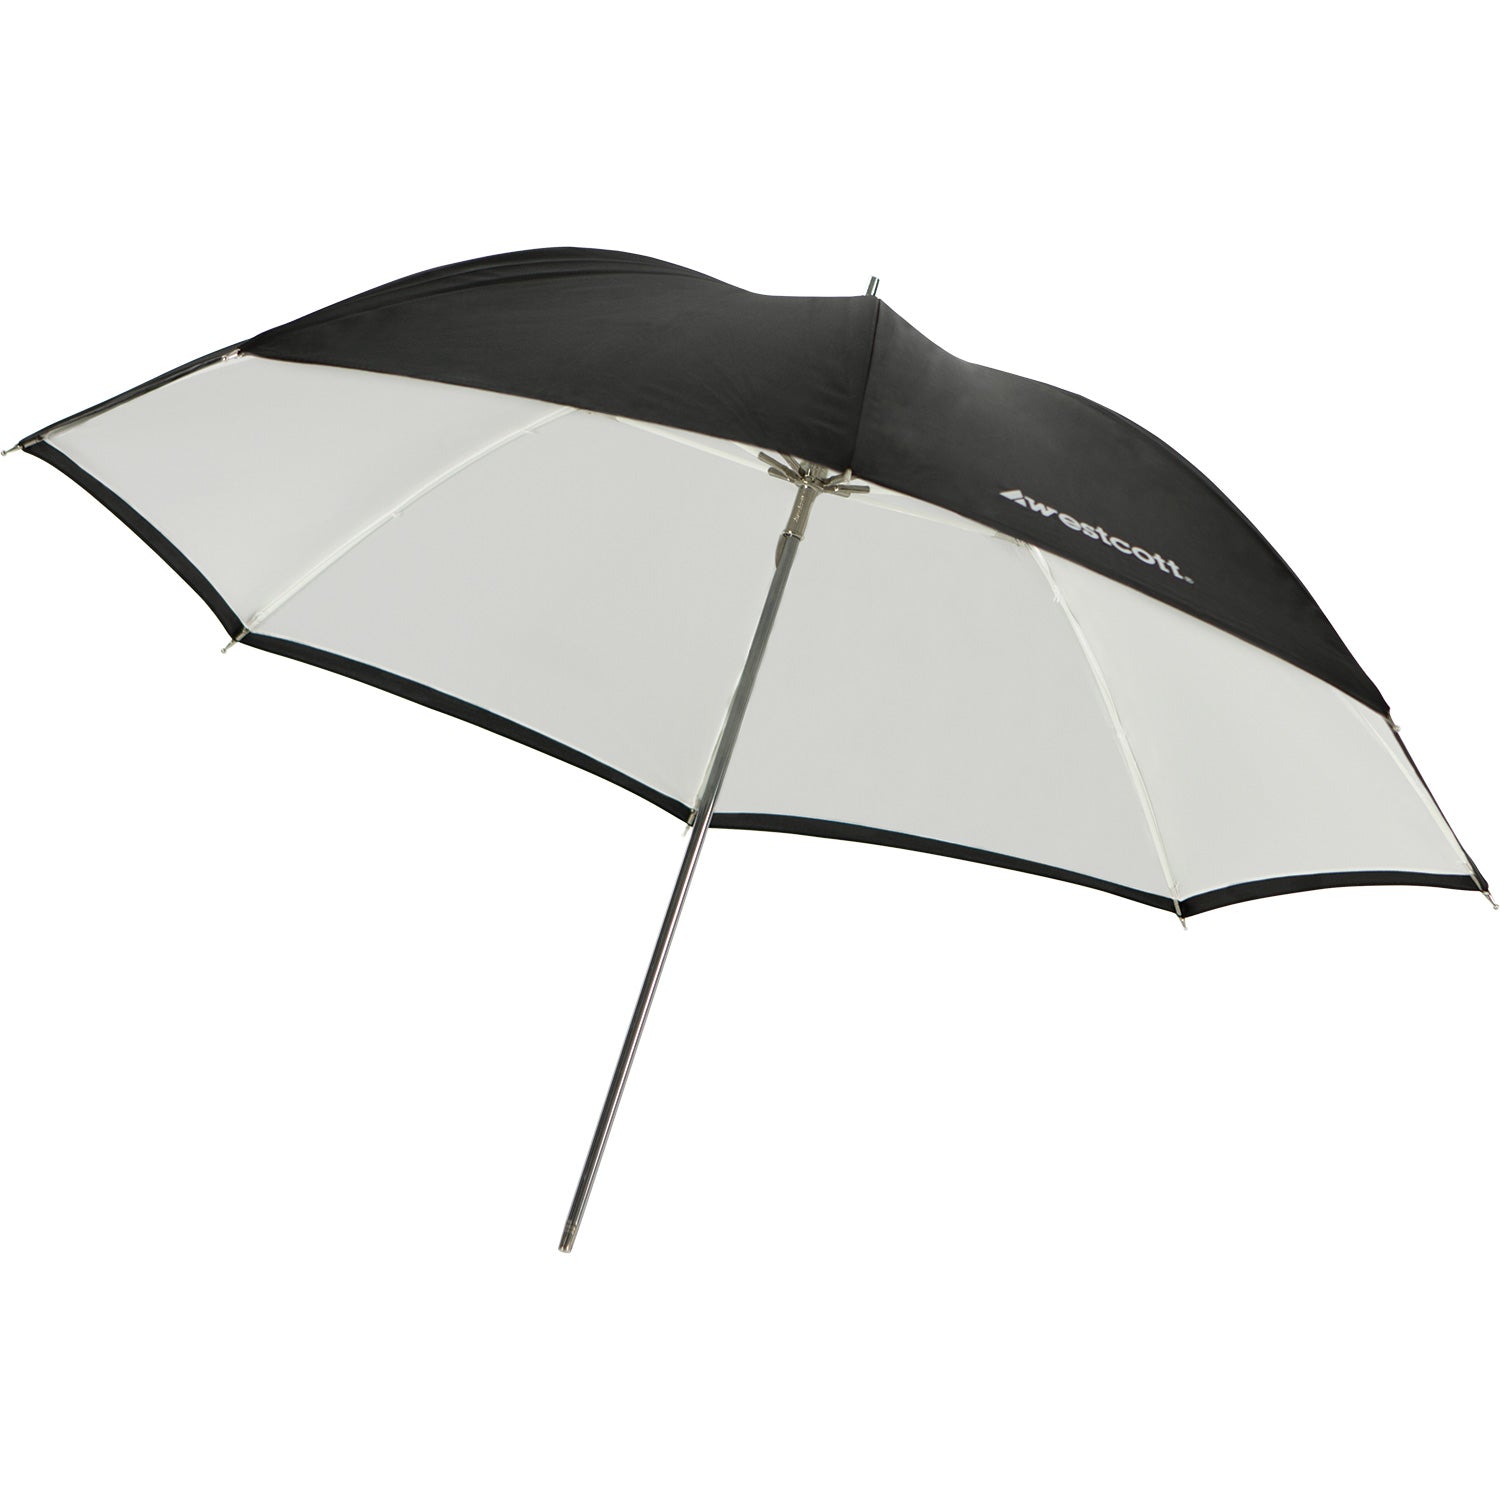 Convertible Umbrella - Optical White Satin with Removable Black Cover (32")